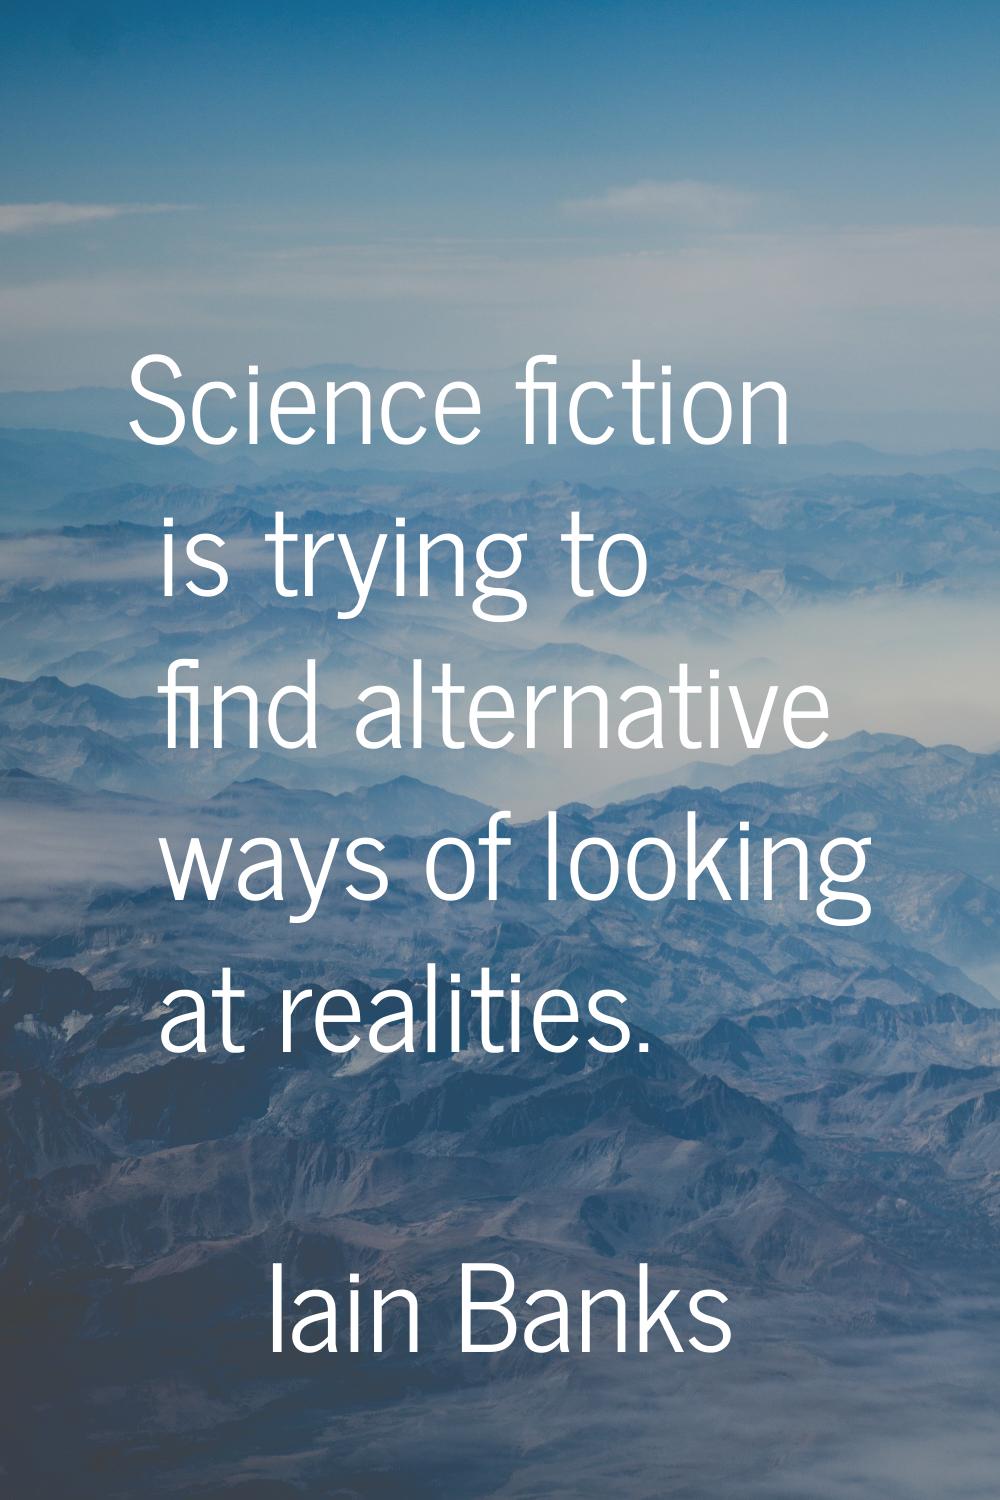 Science fiction is trying to find alternative ways of looking at realities.